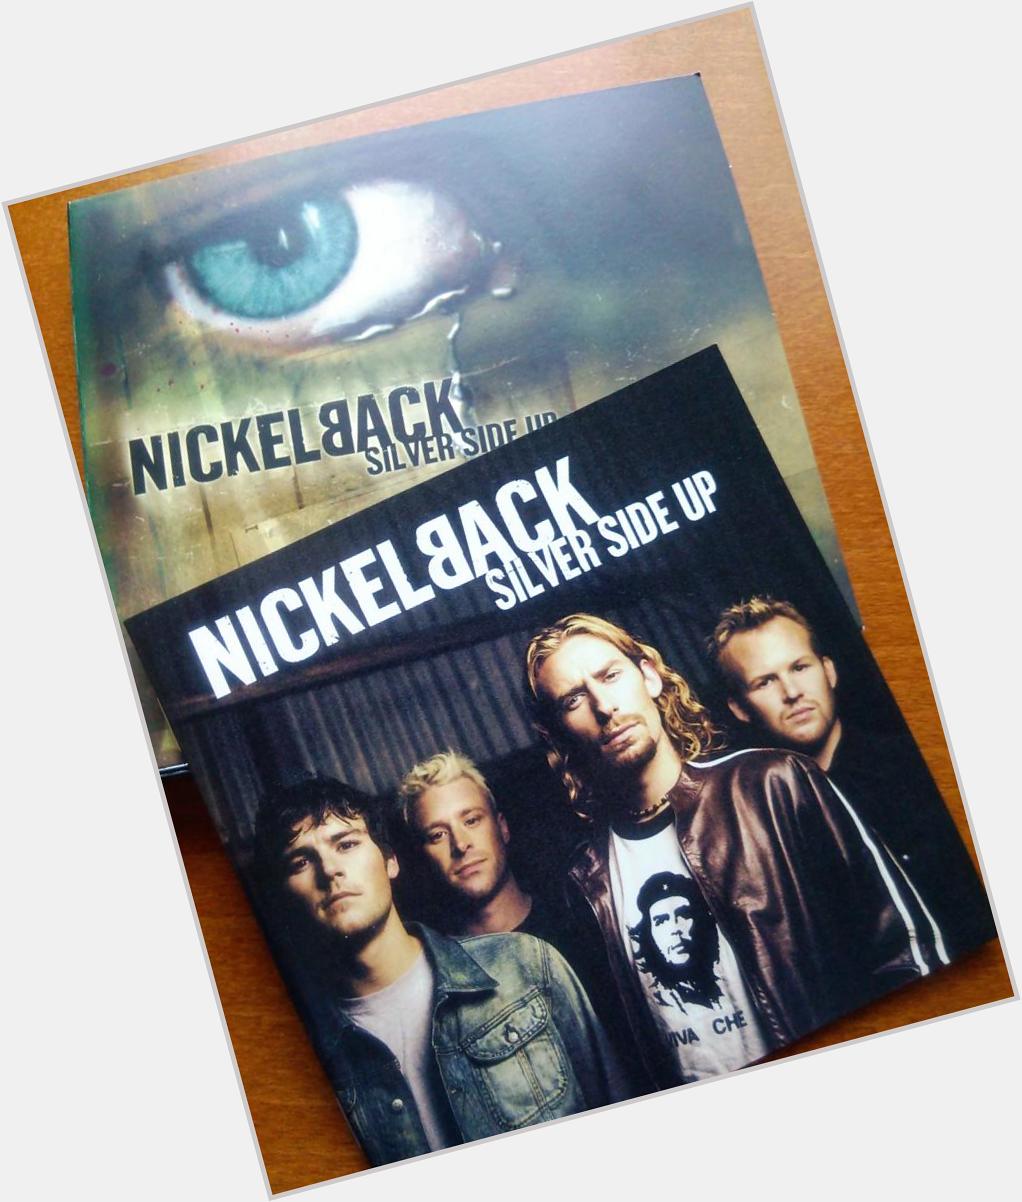 Happy Birthday!! Chad Kroeger
Nickelback - How You Remind Me:  